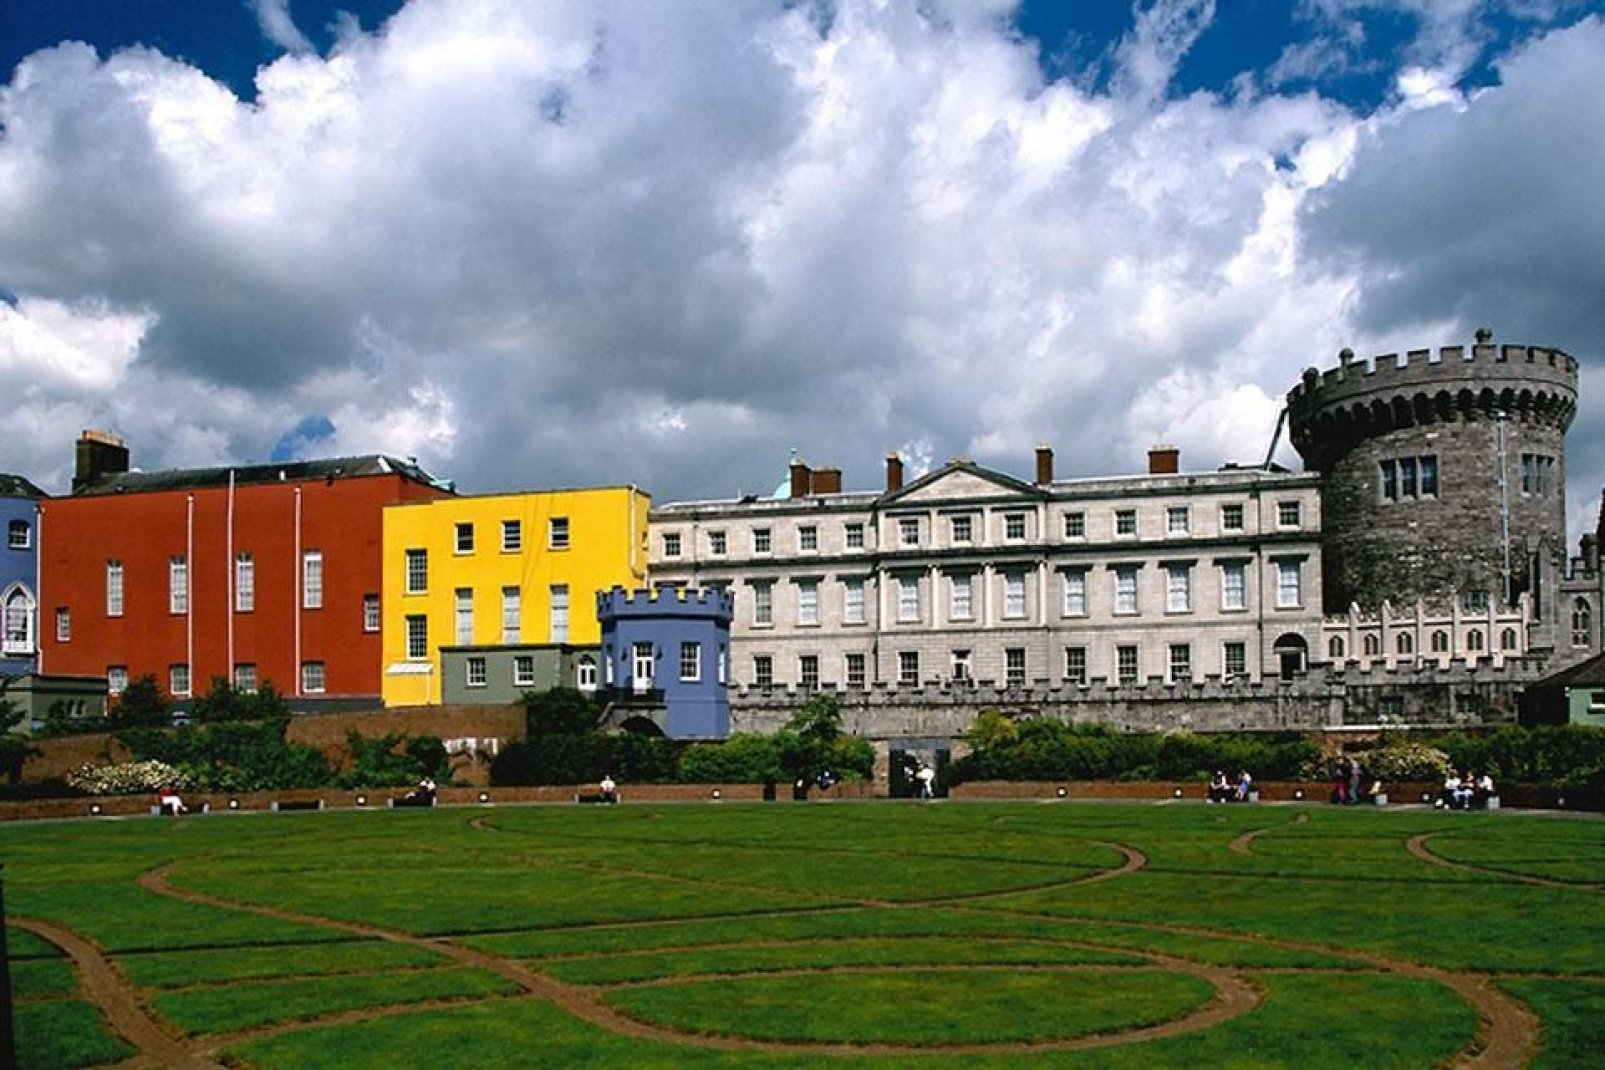 Dublin Castle, bordered with recent colourful constructions, towers over a beautiful and well-maintained garden